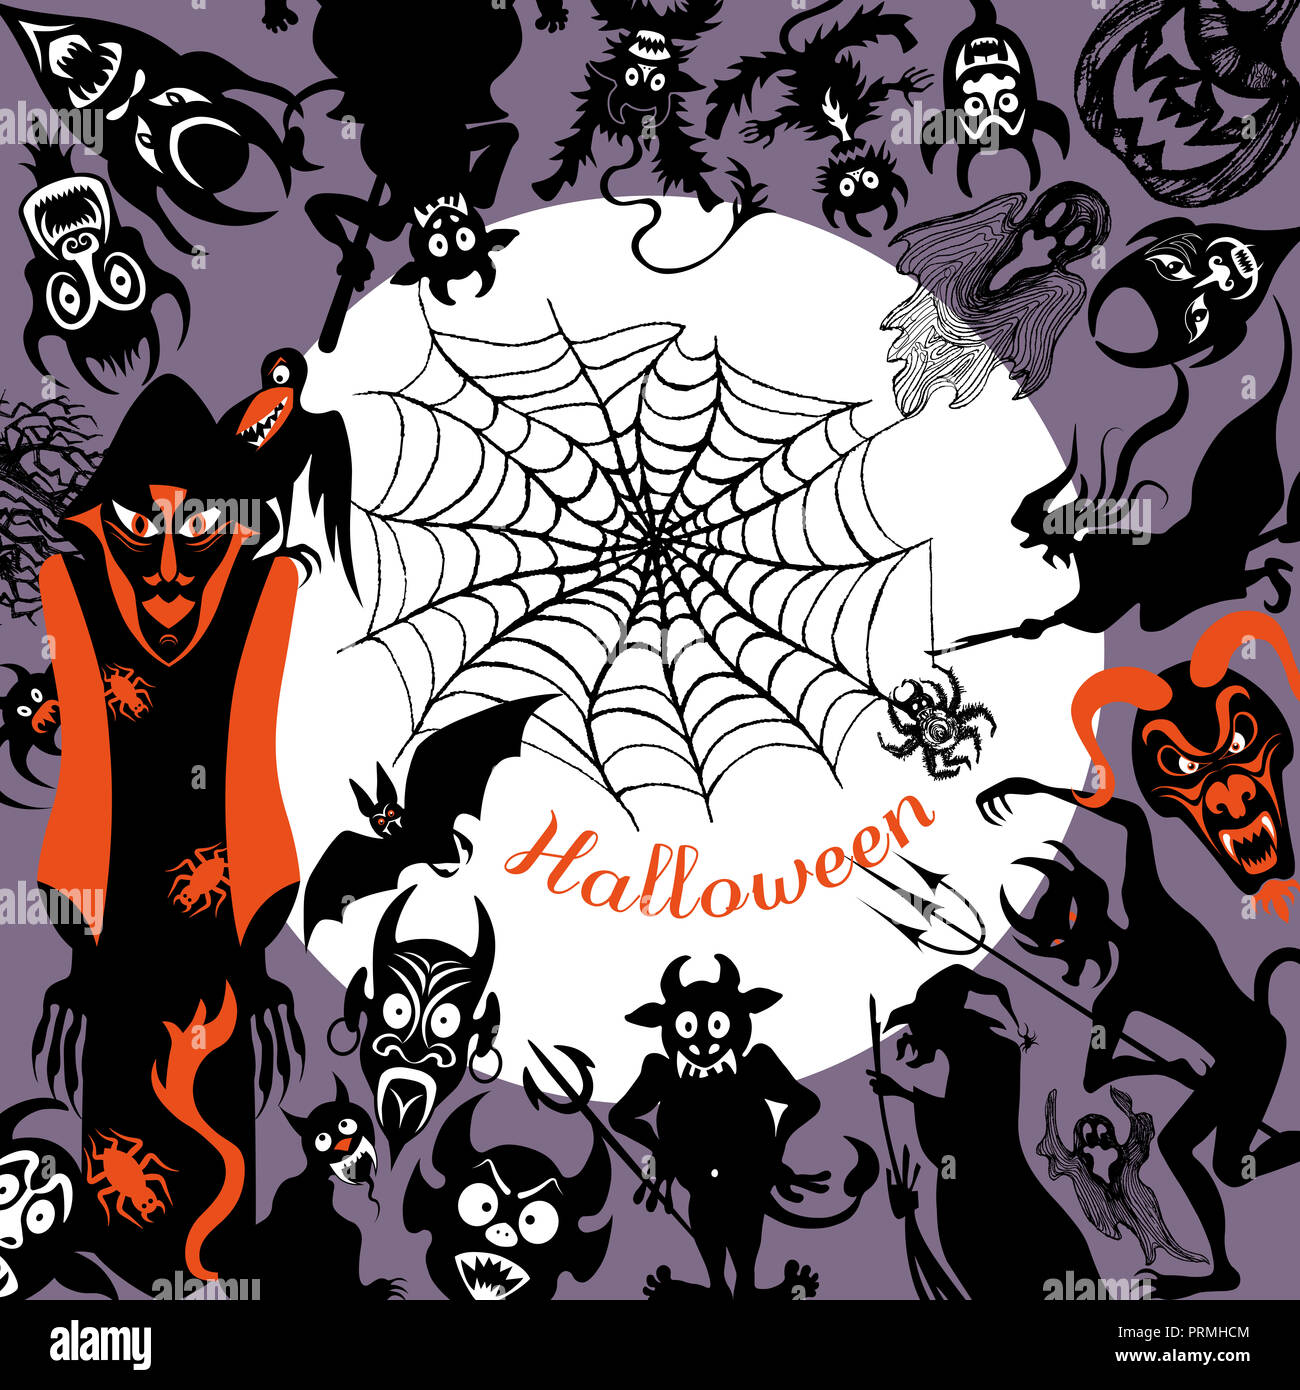 Background of Halloween icons with round frame. Template for packaging, cards, posters, menu. stock illustration. Stock Photo